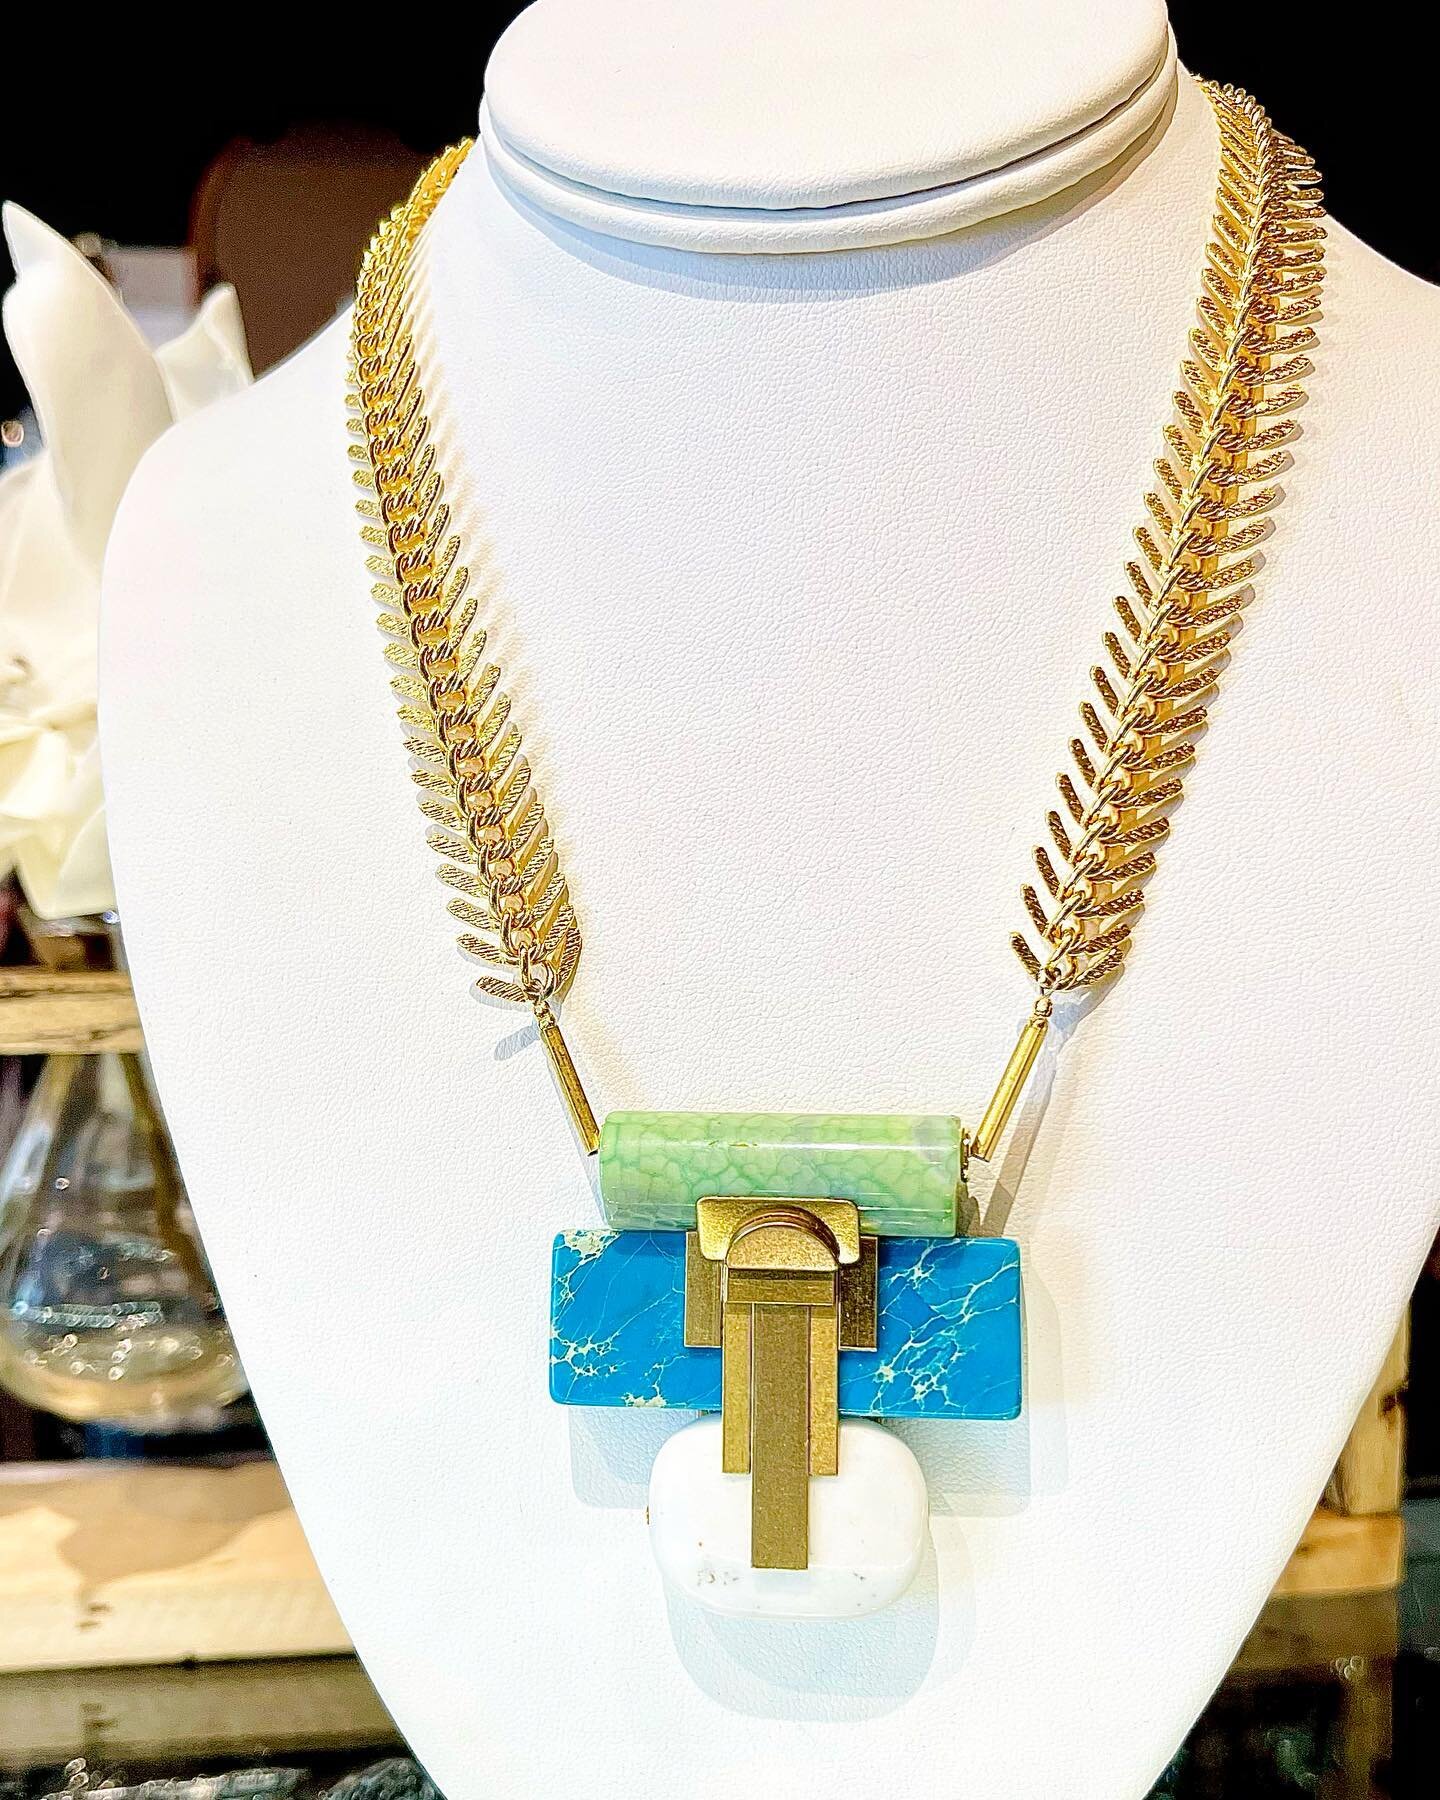 I think this weekend calls for some statement pieces #turquoise #statementjewelry #johnnieq #handmade #independenceday #womenownedbusiness #shopsmall #franklintn #nashville #boutiqueshopping @davidaubrey_jewelry